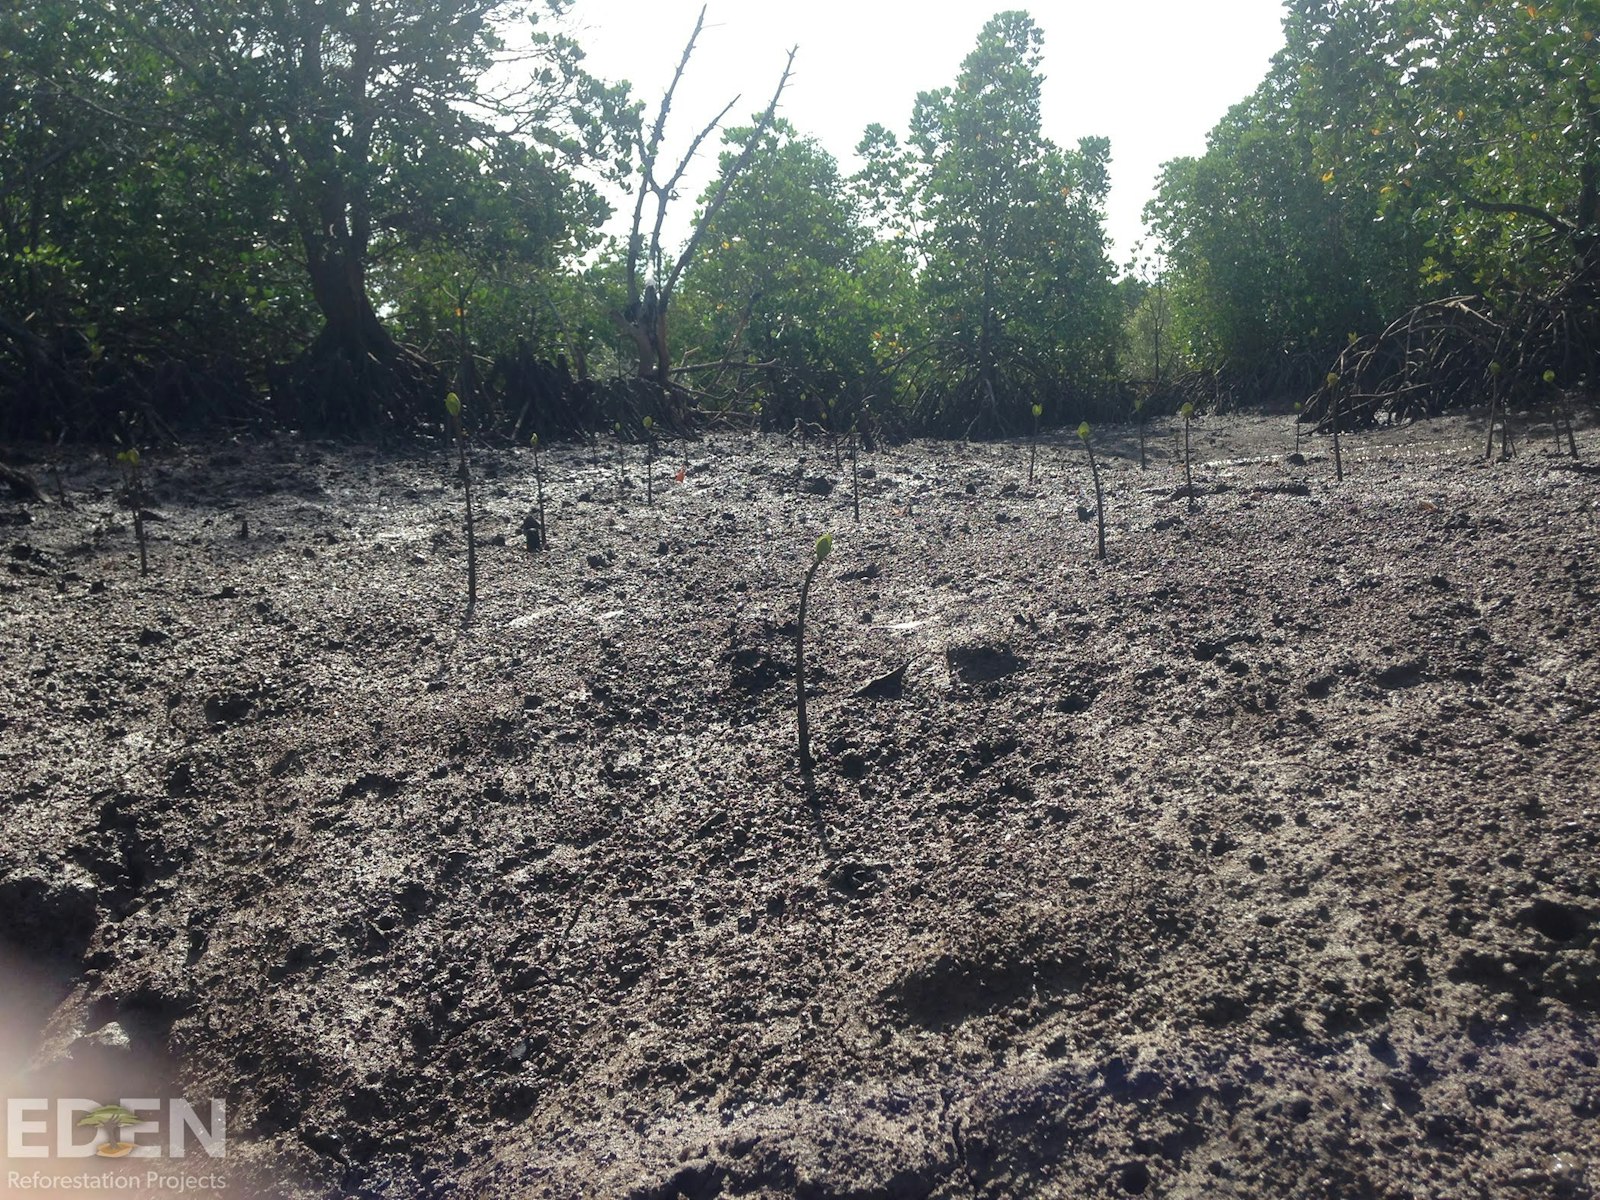 Mangroves showing new growth